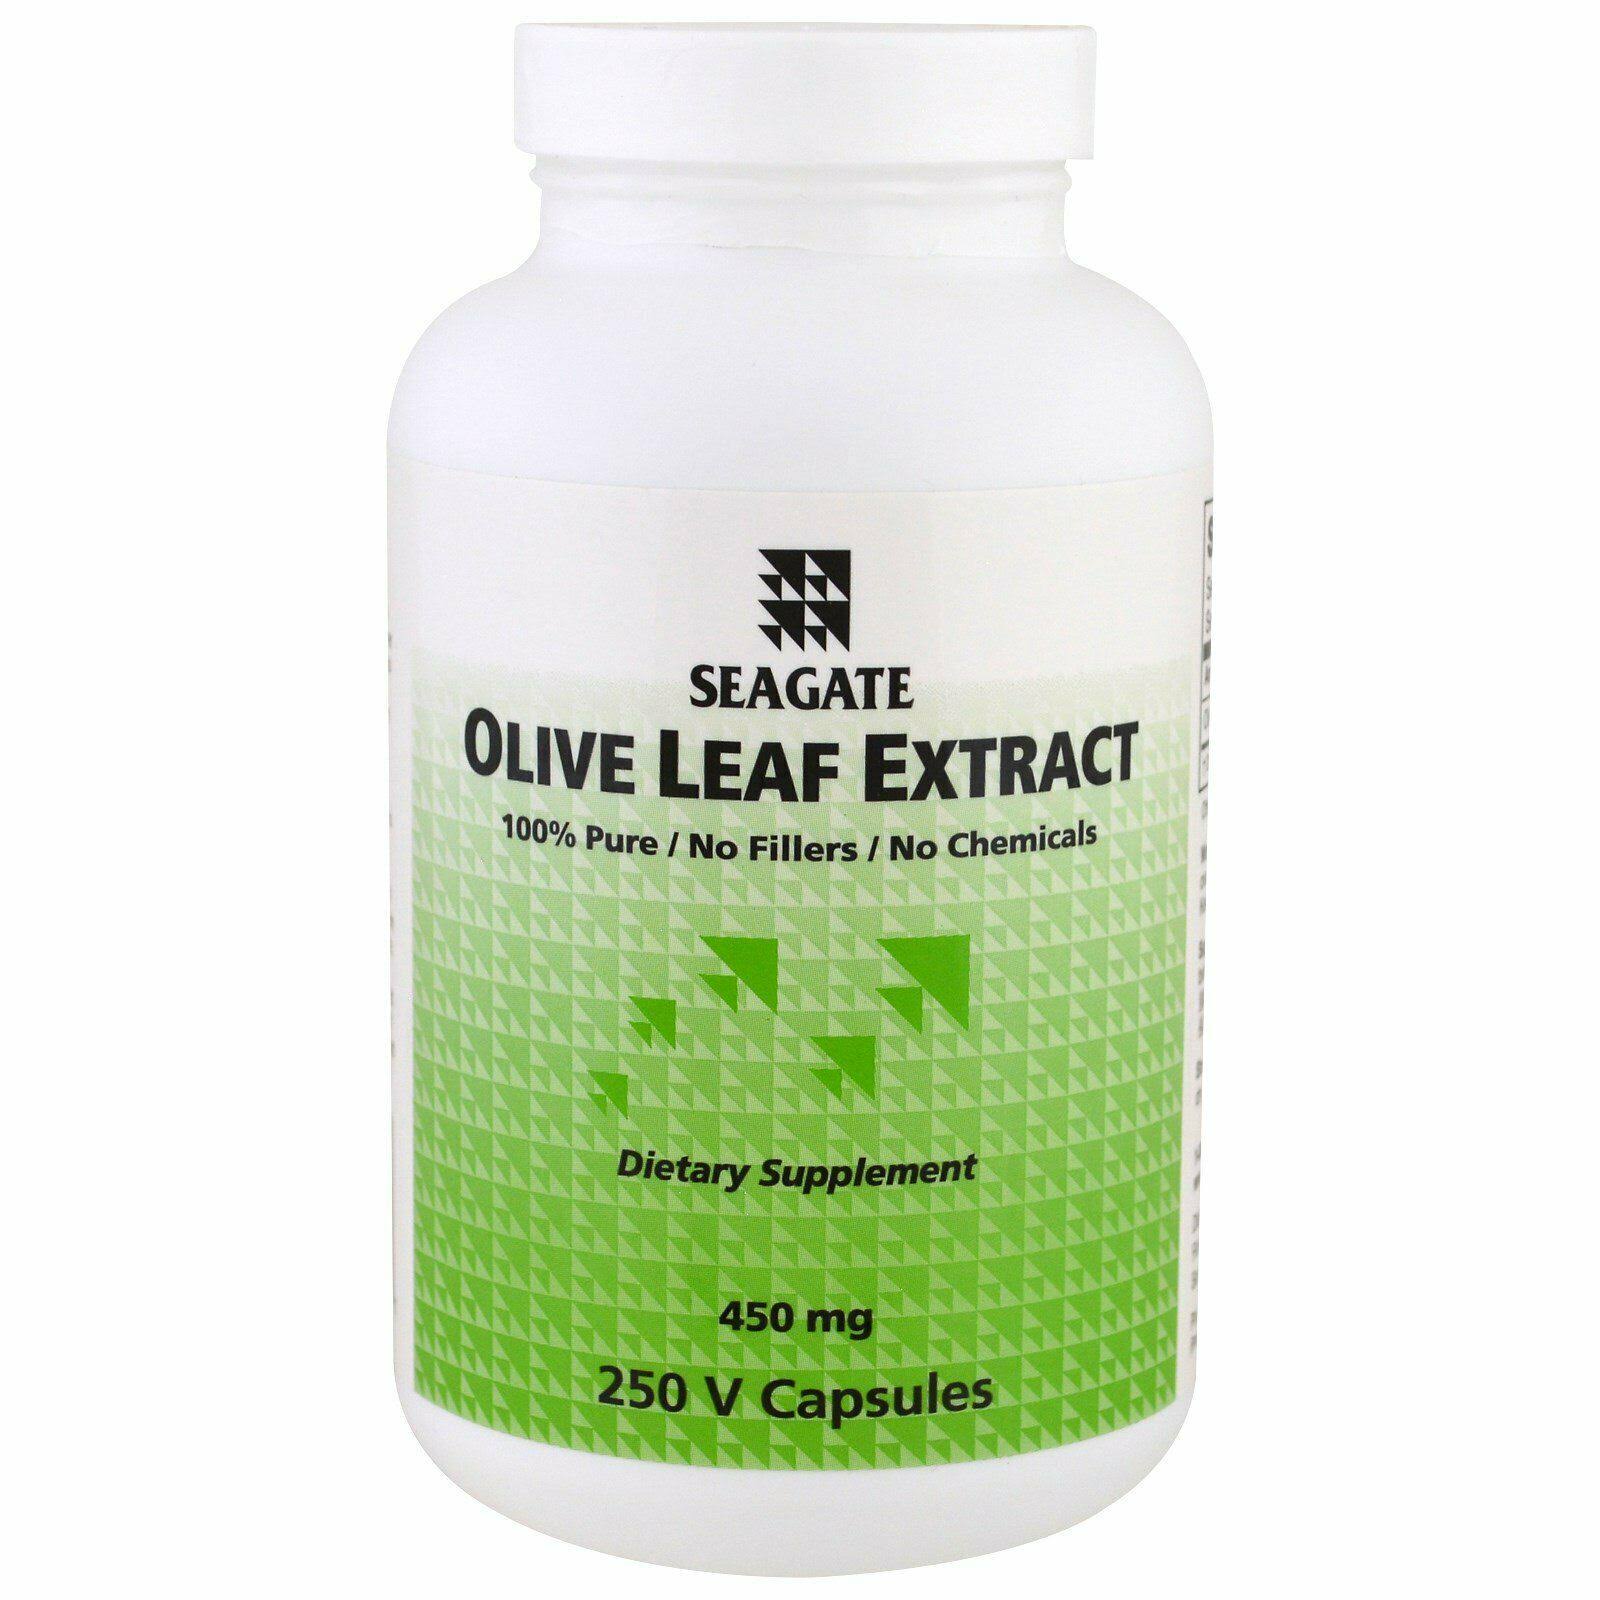 Seagate Olive Leaf Extract Supplement - 450mg, 250 Capsules